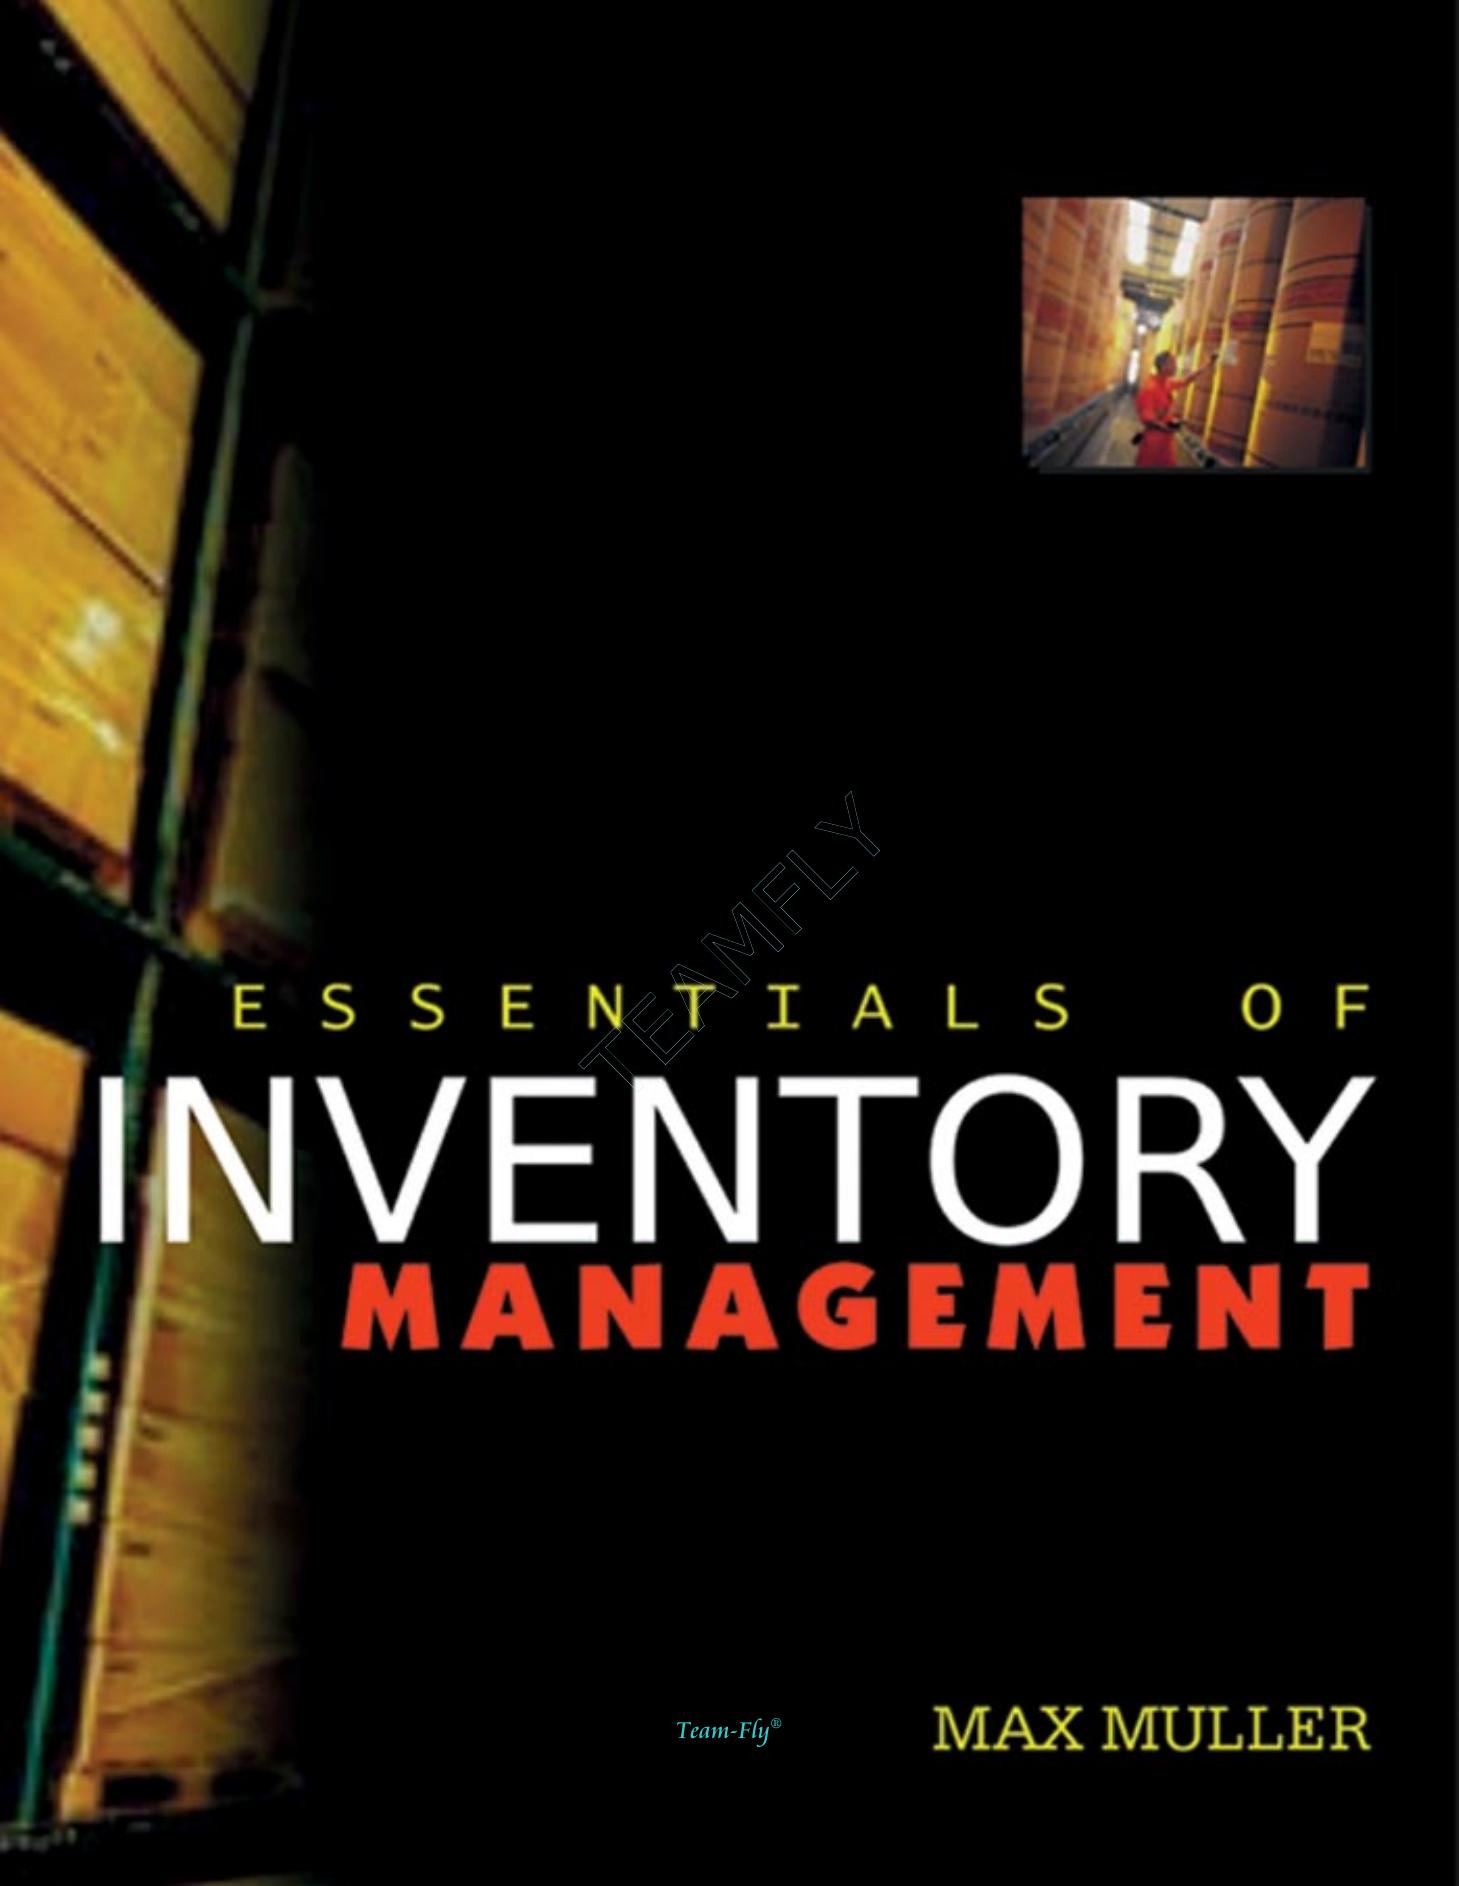 Essentials of Inventory Management by Max Muller